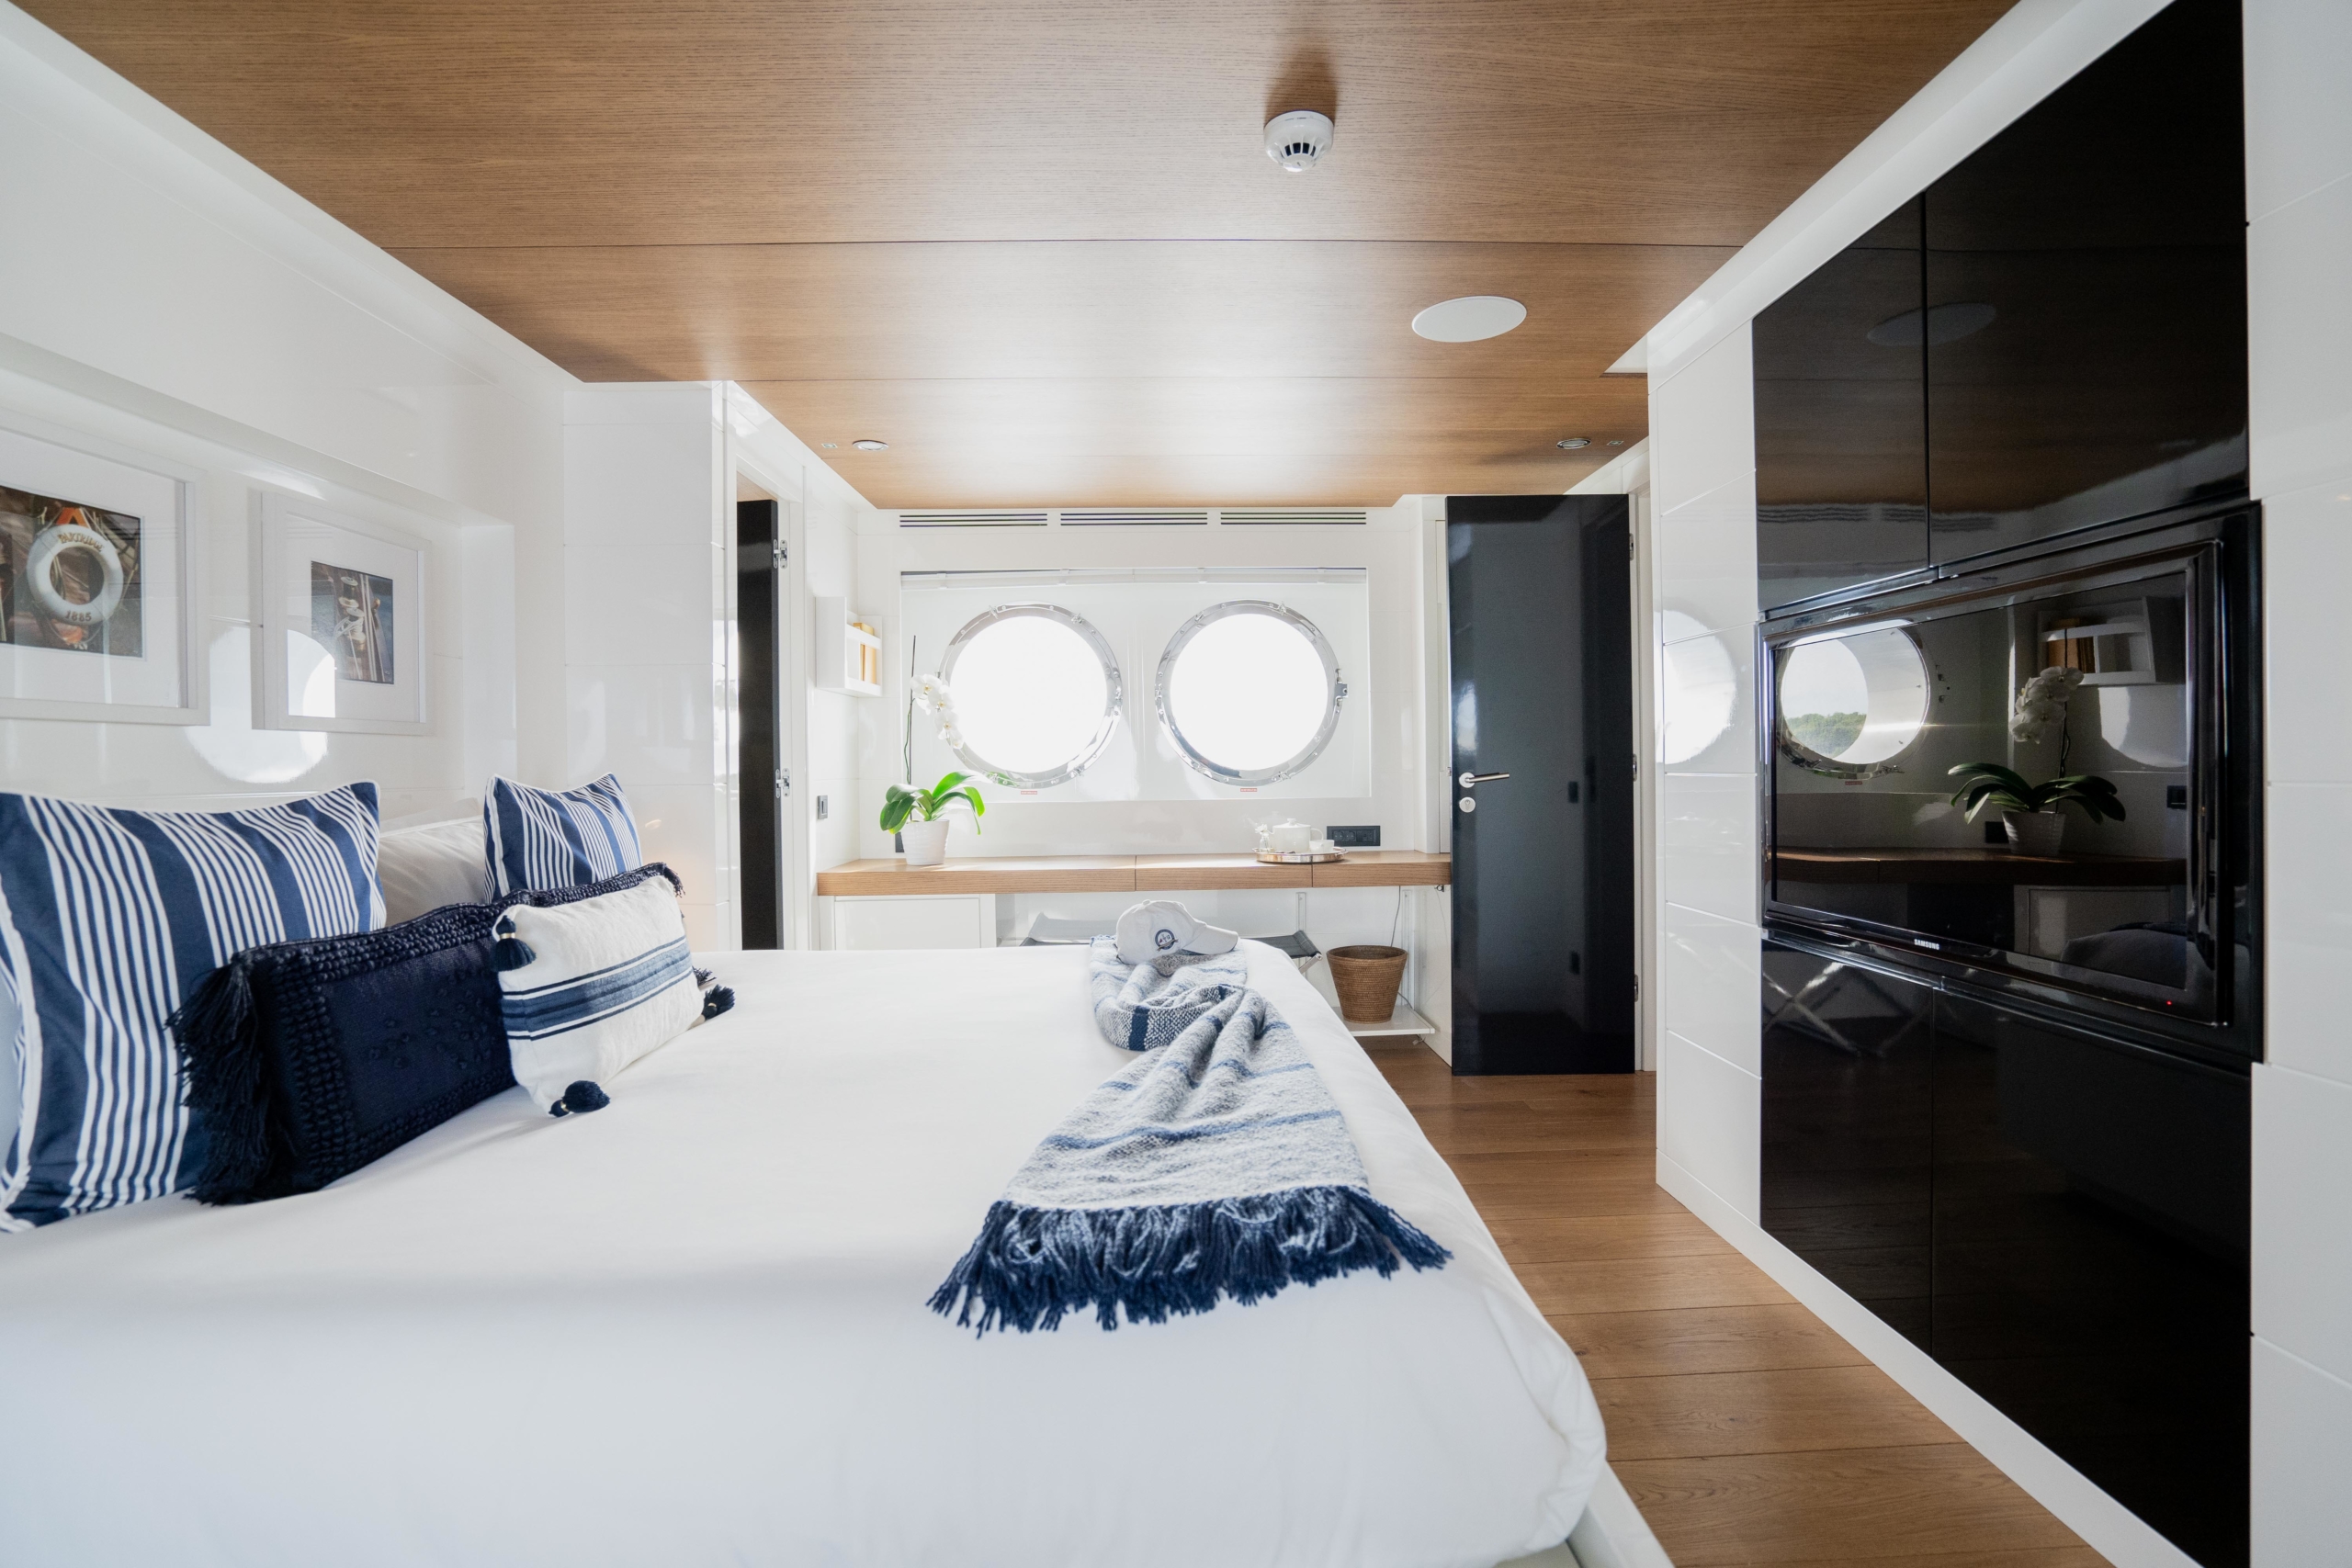 PREFERENCE 19-Tansu Yachts-Yacht For Charter-Master Cabin